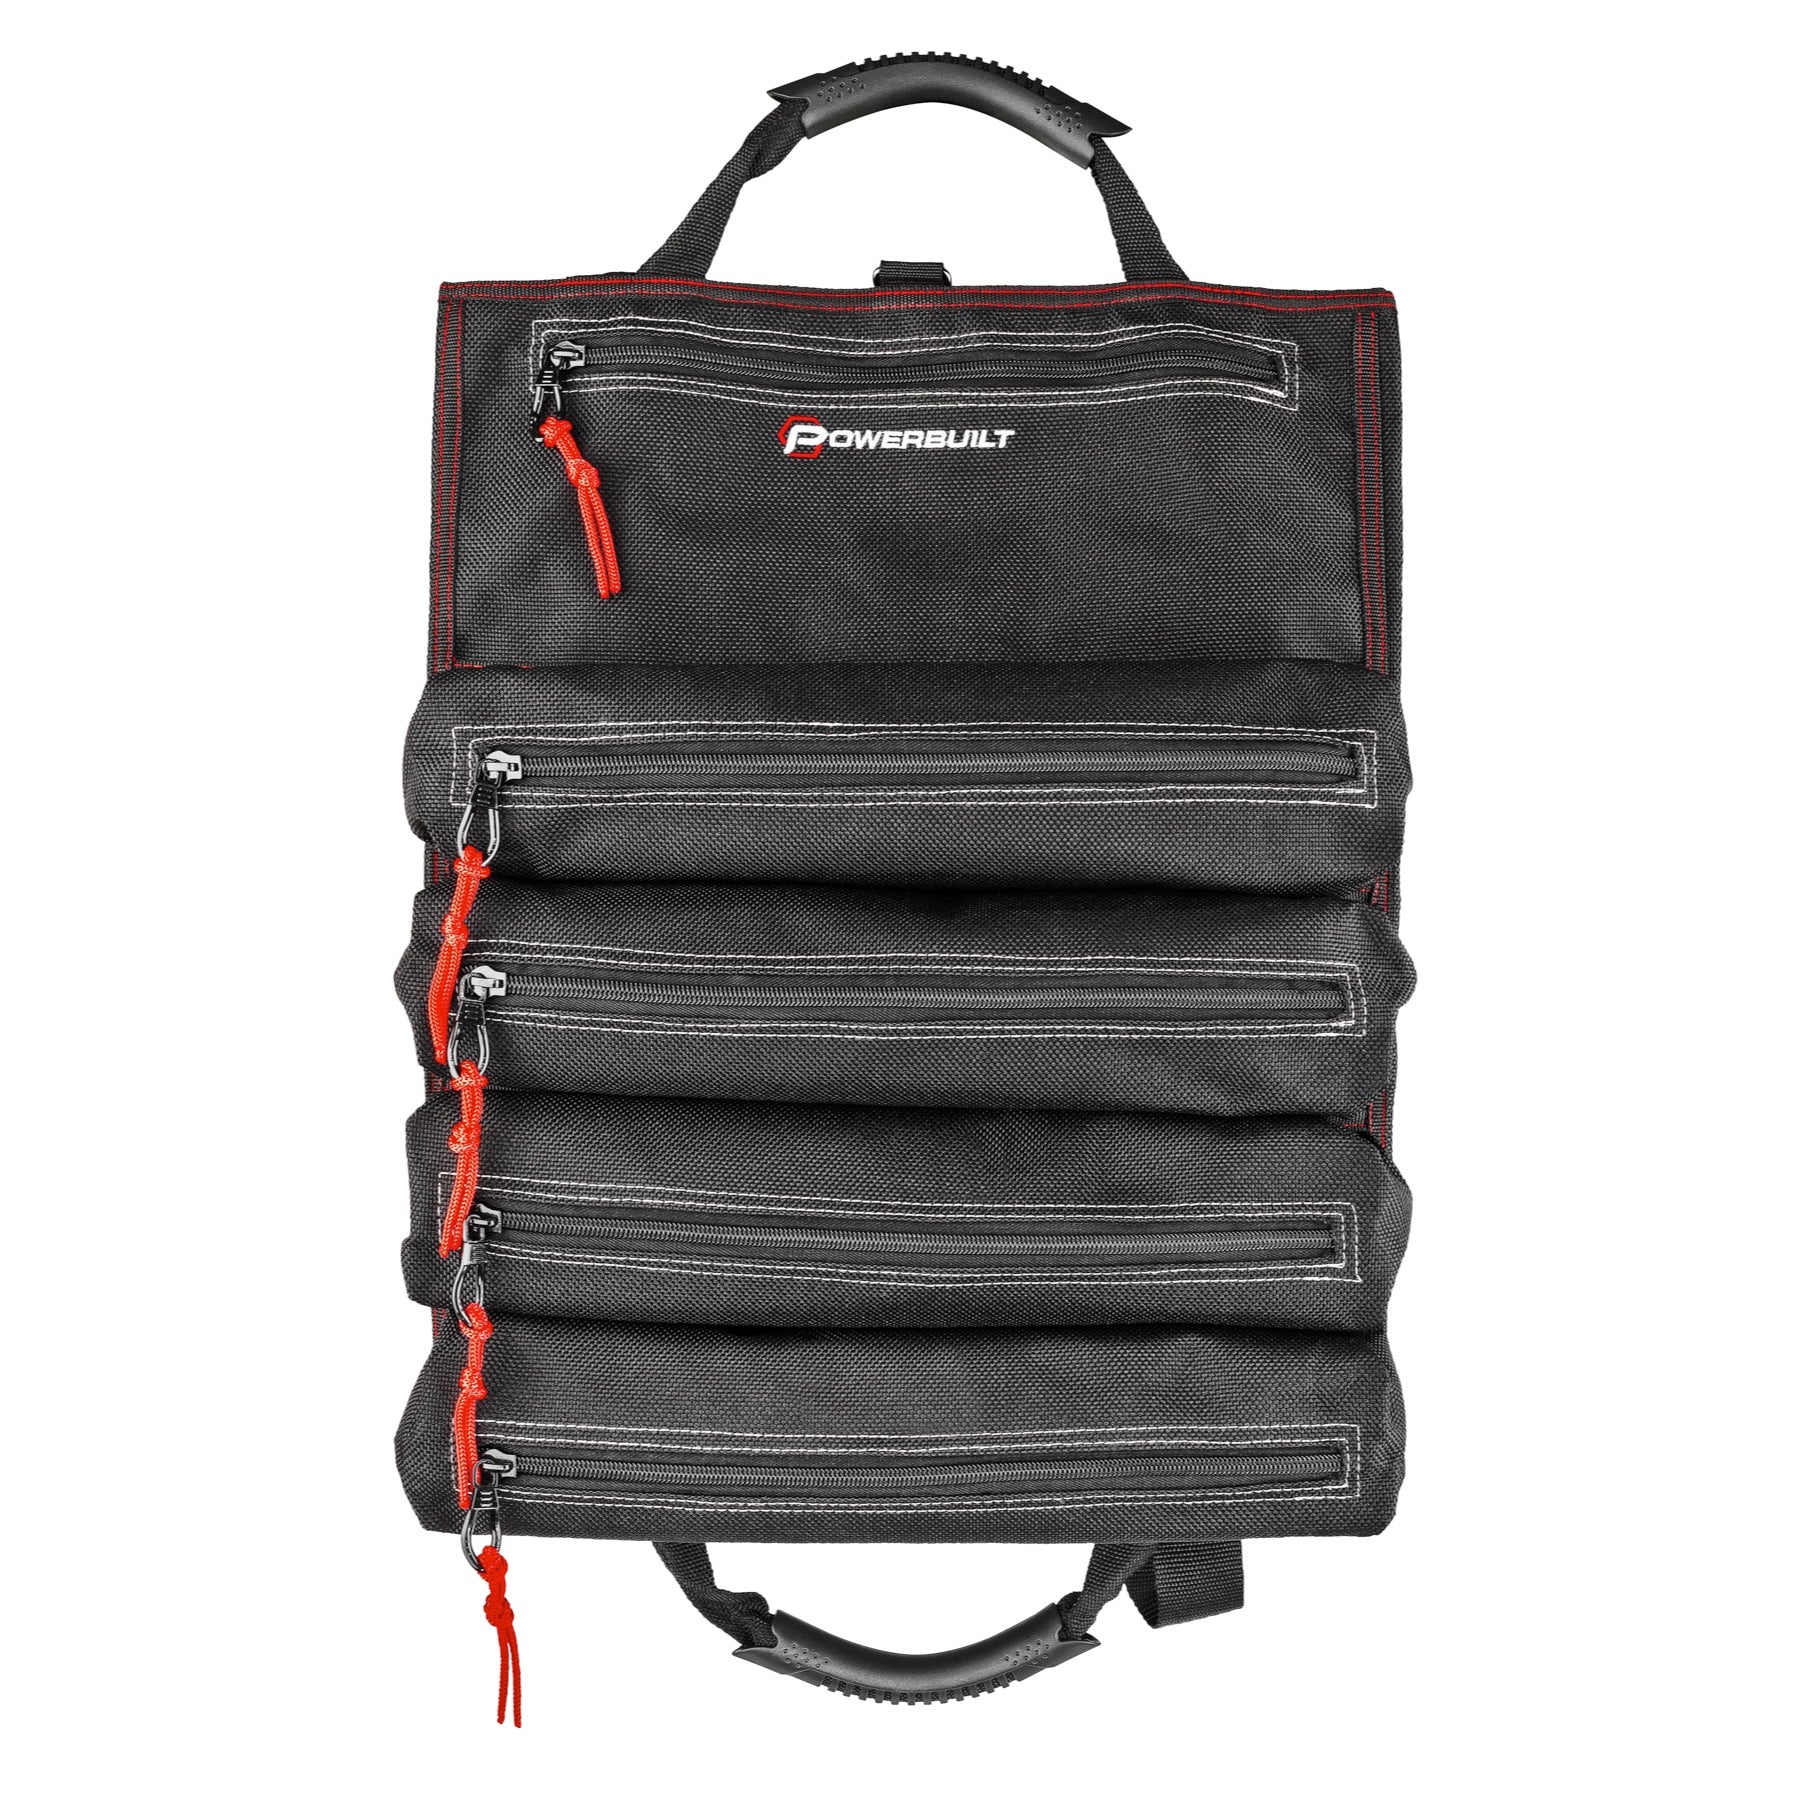 BENNESONS Worker's Pro Construction Tool Bag - 15 Inch Heavy Duty Tool Bag  Organizer w/ 14 Pockets Durable Zipper - Sturdy Fabric - Comfortable Straps